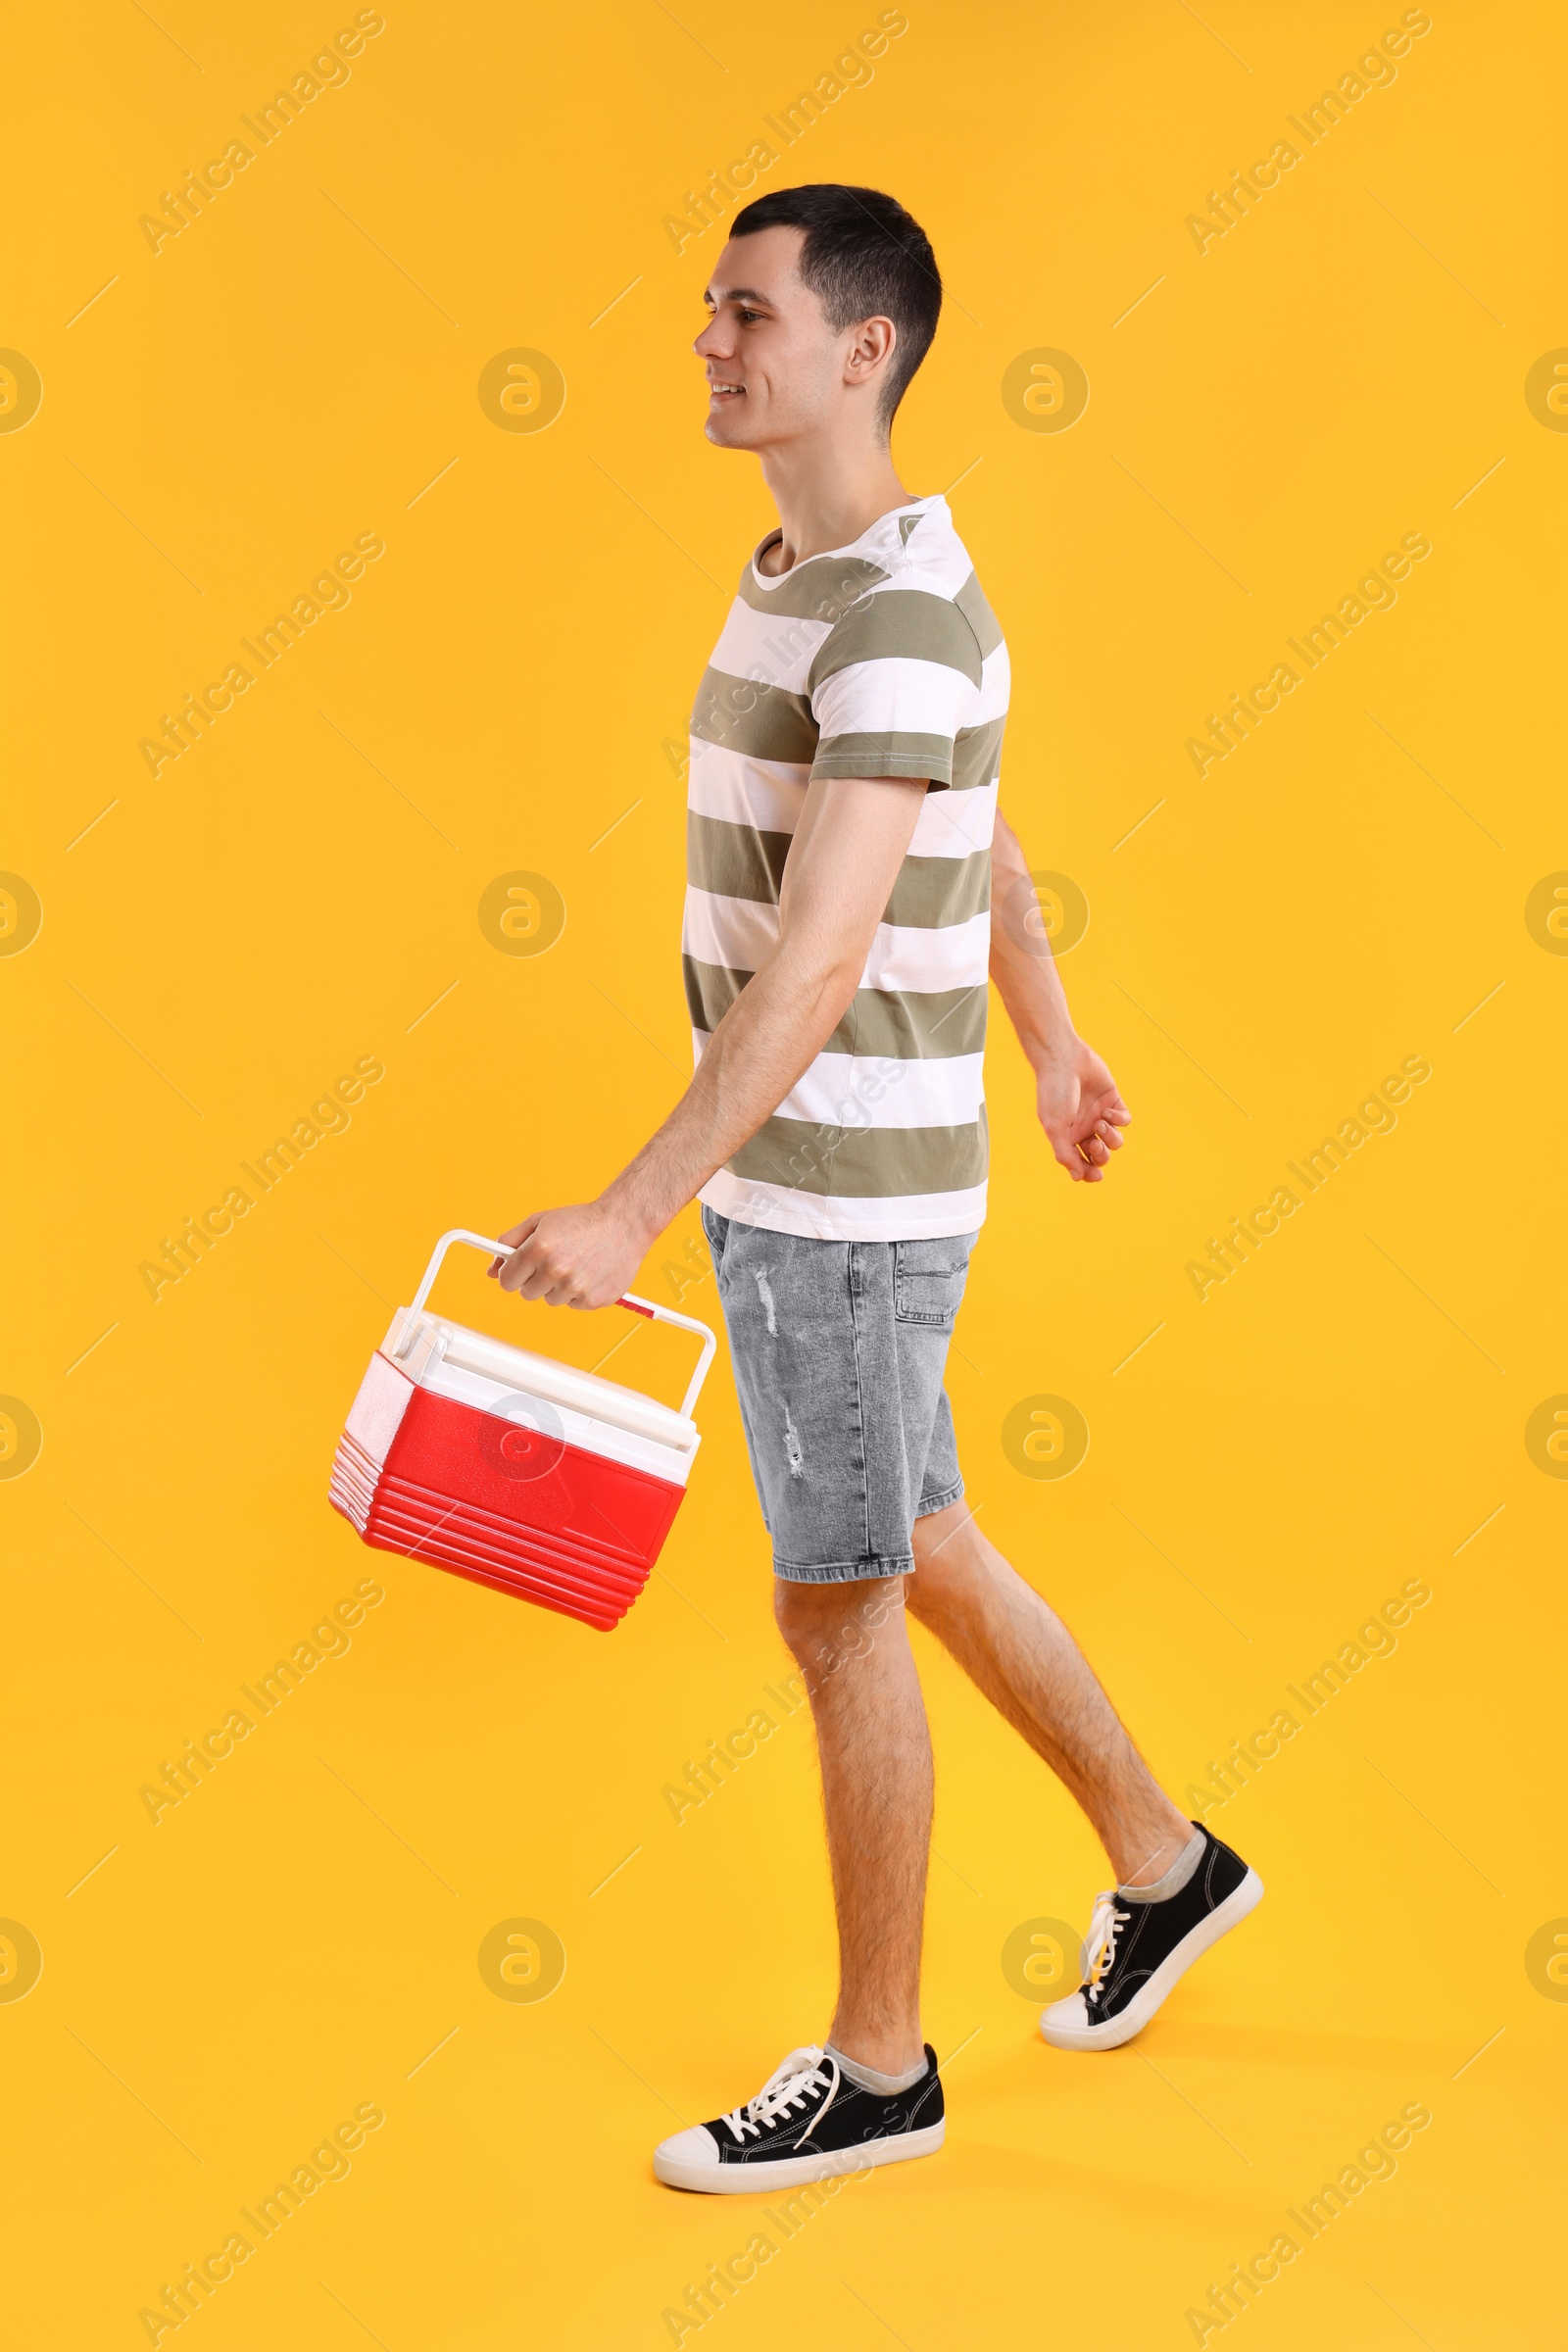 Photo of Man with red cool box walking on orange background